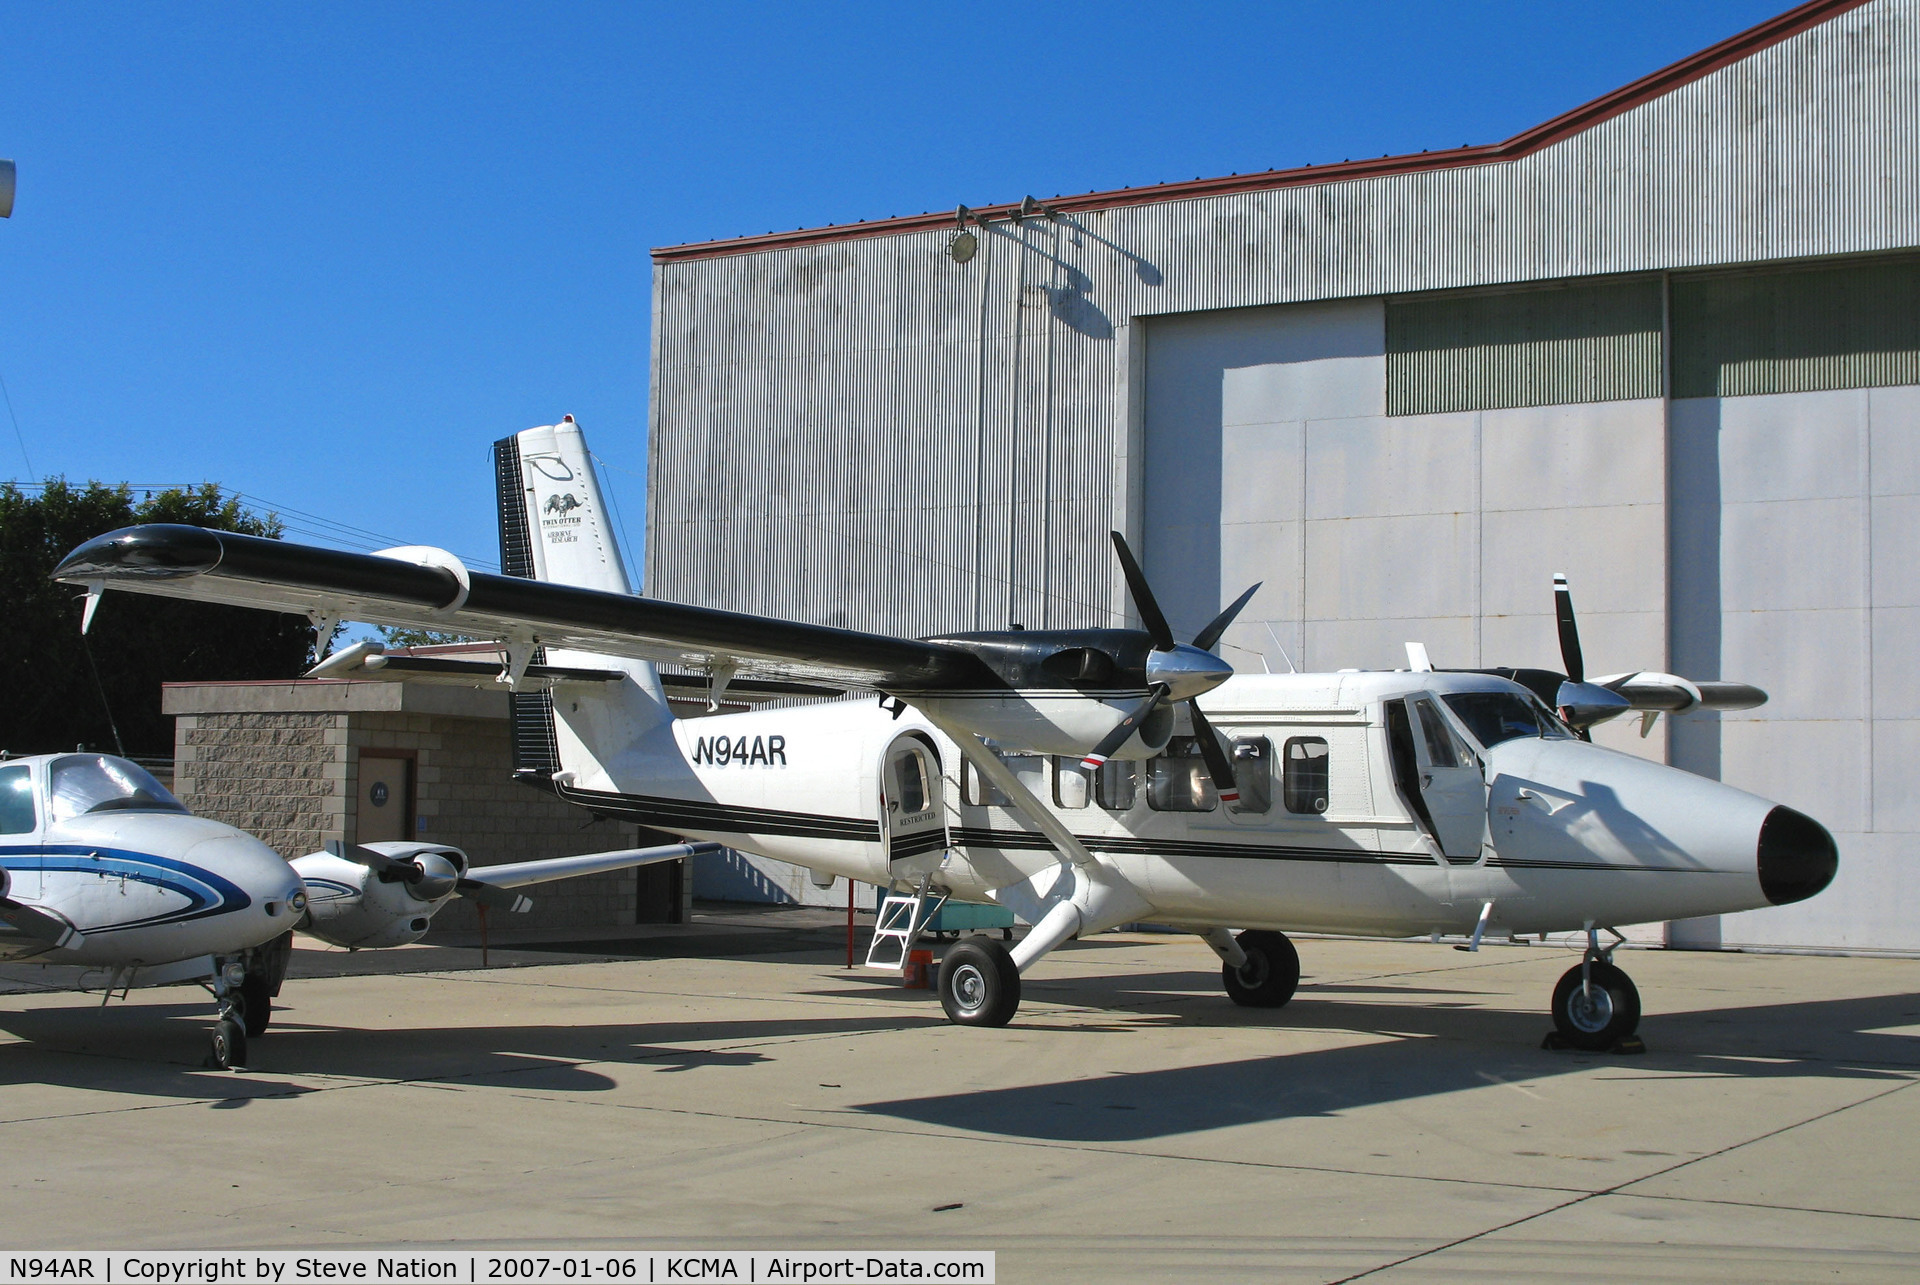 N94AR, 1973 De Havilland Canada DHC-6-300 Twin Otter C/N 388, Twin Otter International 1973 DHC-6-300 used for skydiving